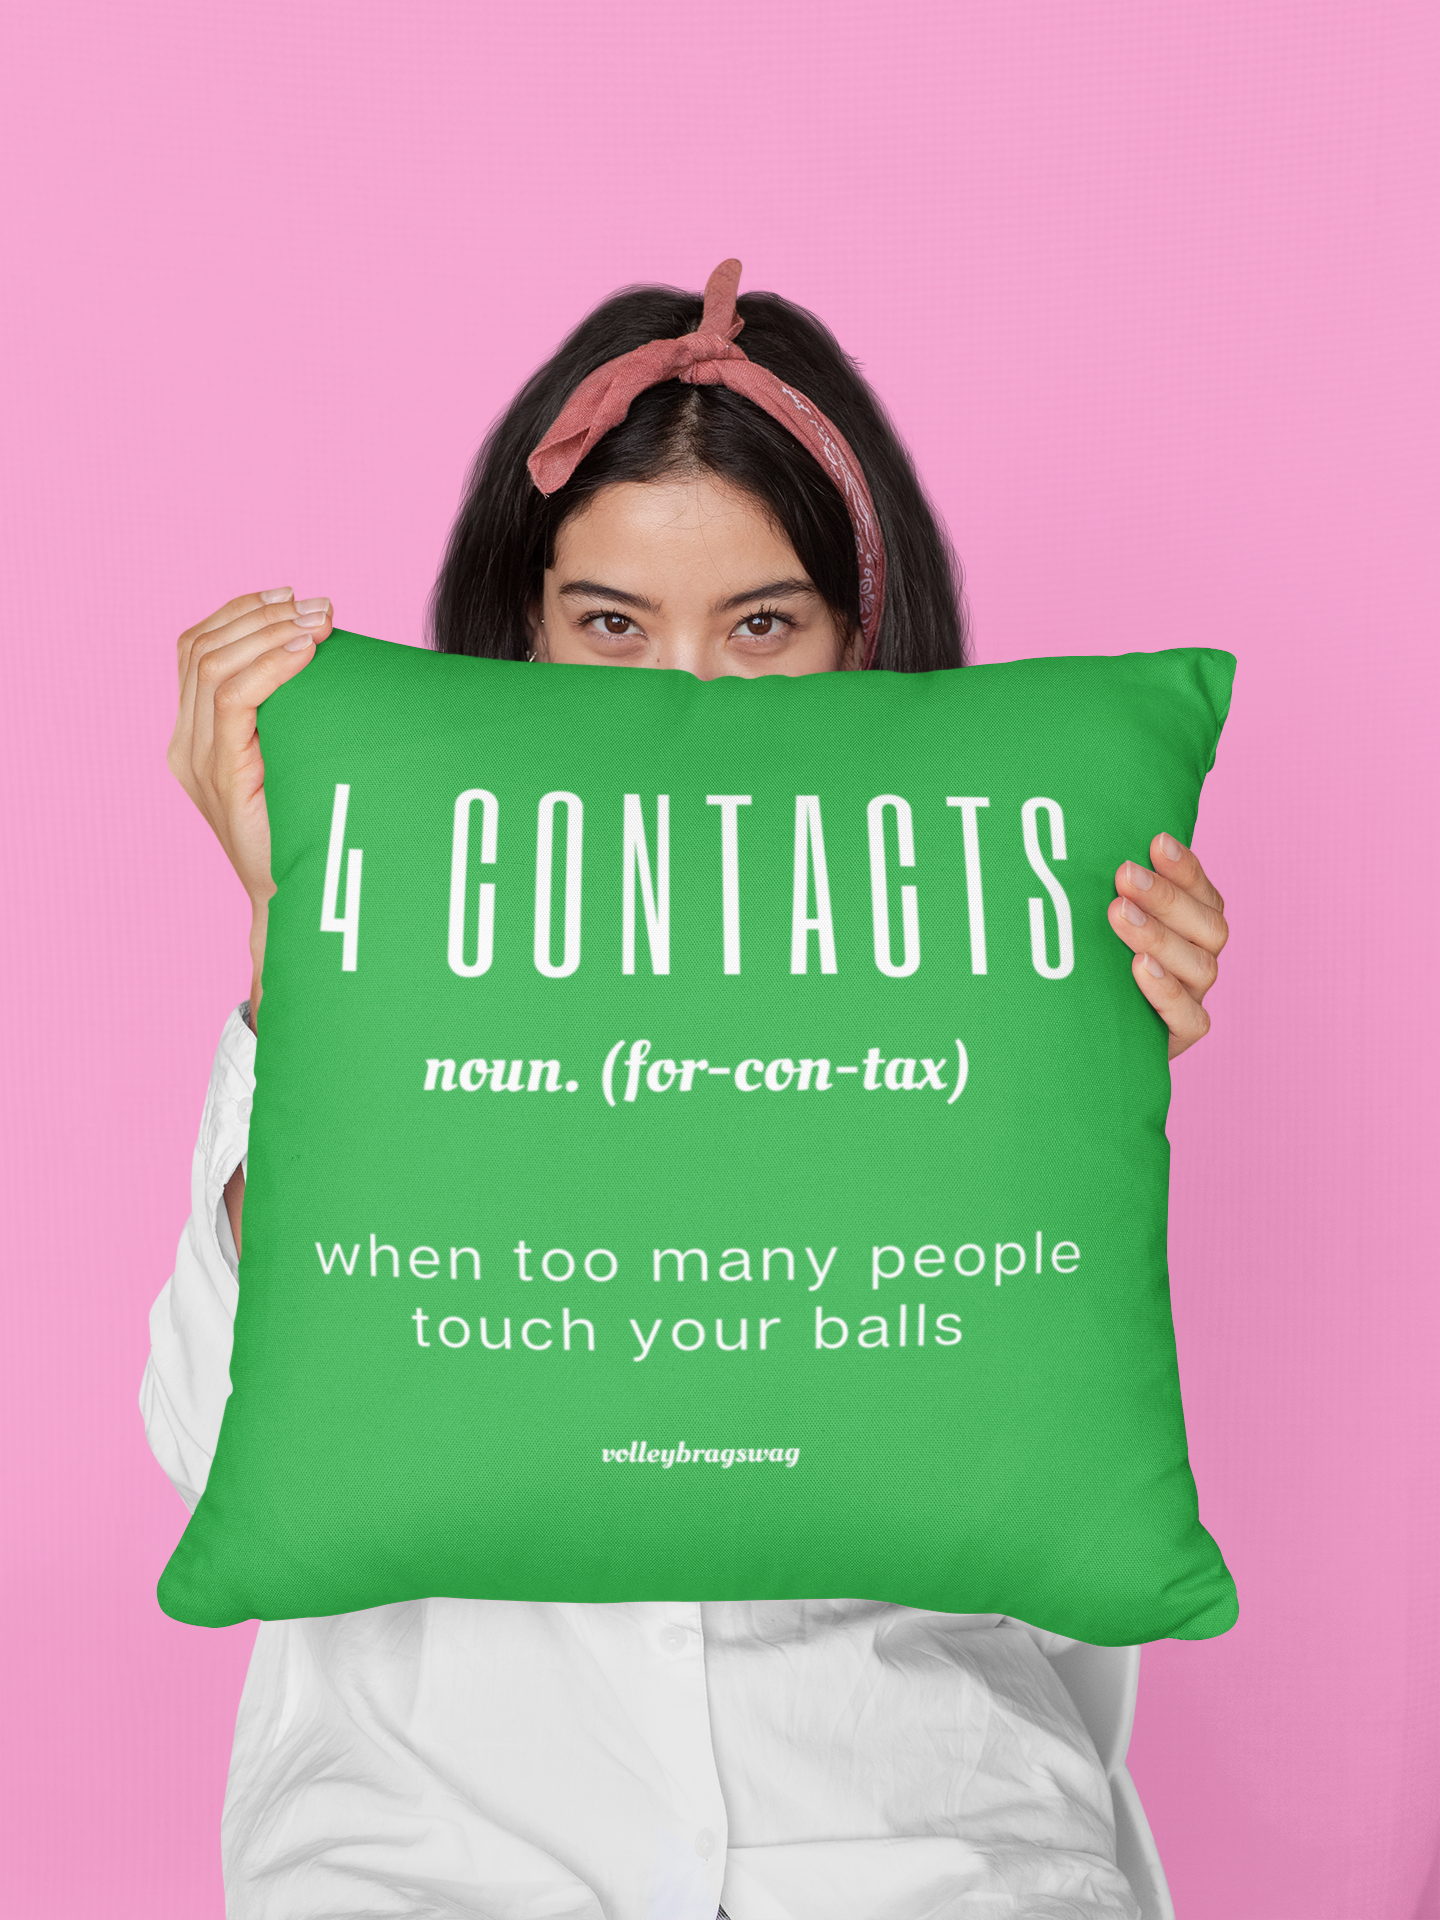 4 Contacts (noun) When Too Many People Touch Your Balls volleyball pillow. April Chapple, Launches a Hilarious Volleyball Pillow Line With Fun Tongue-in-Cheek Designs sure to make players laugh.